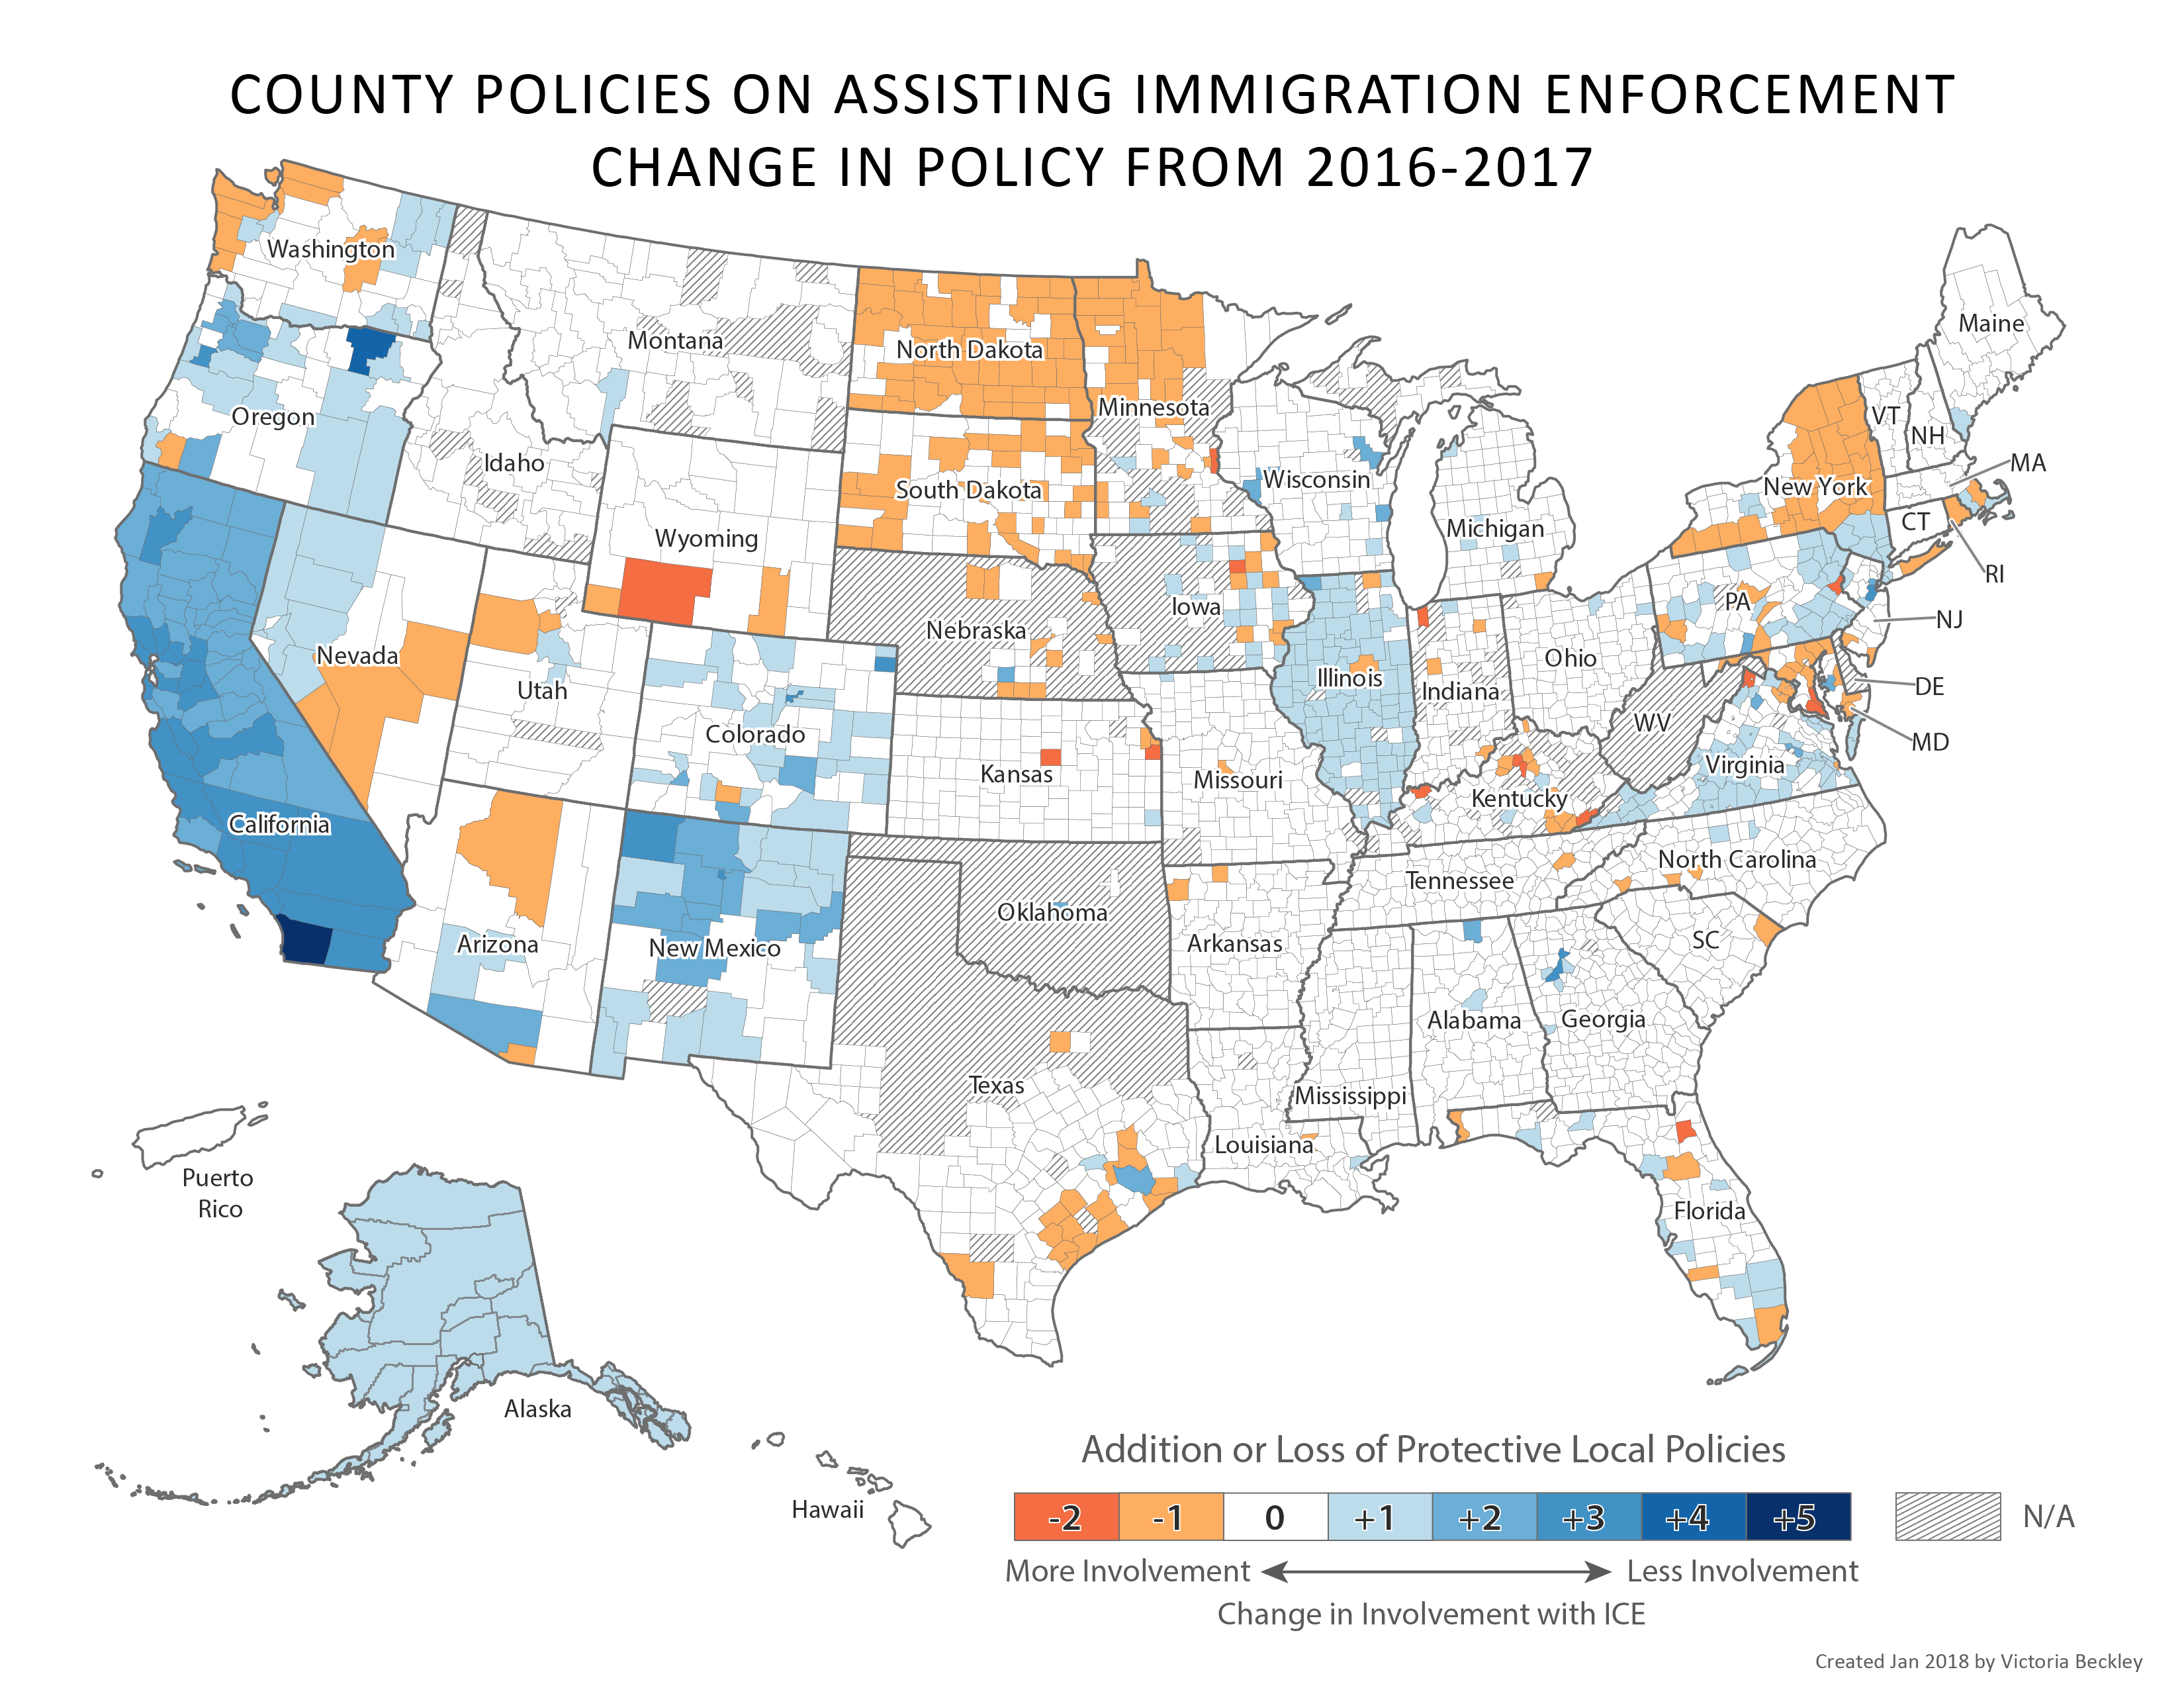 MAPPING IMMIGRATION POLICIES BY COUNTY